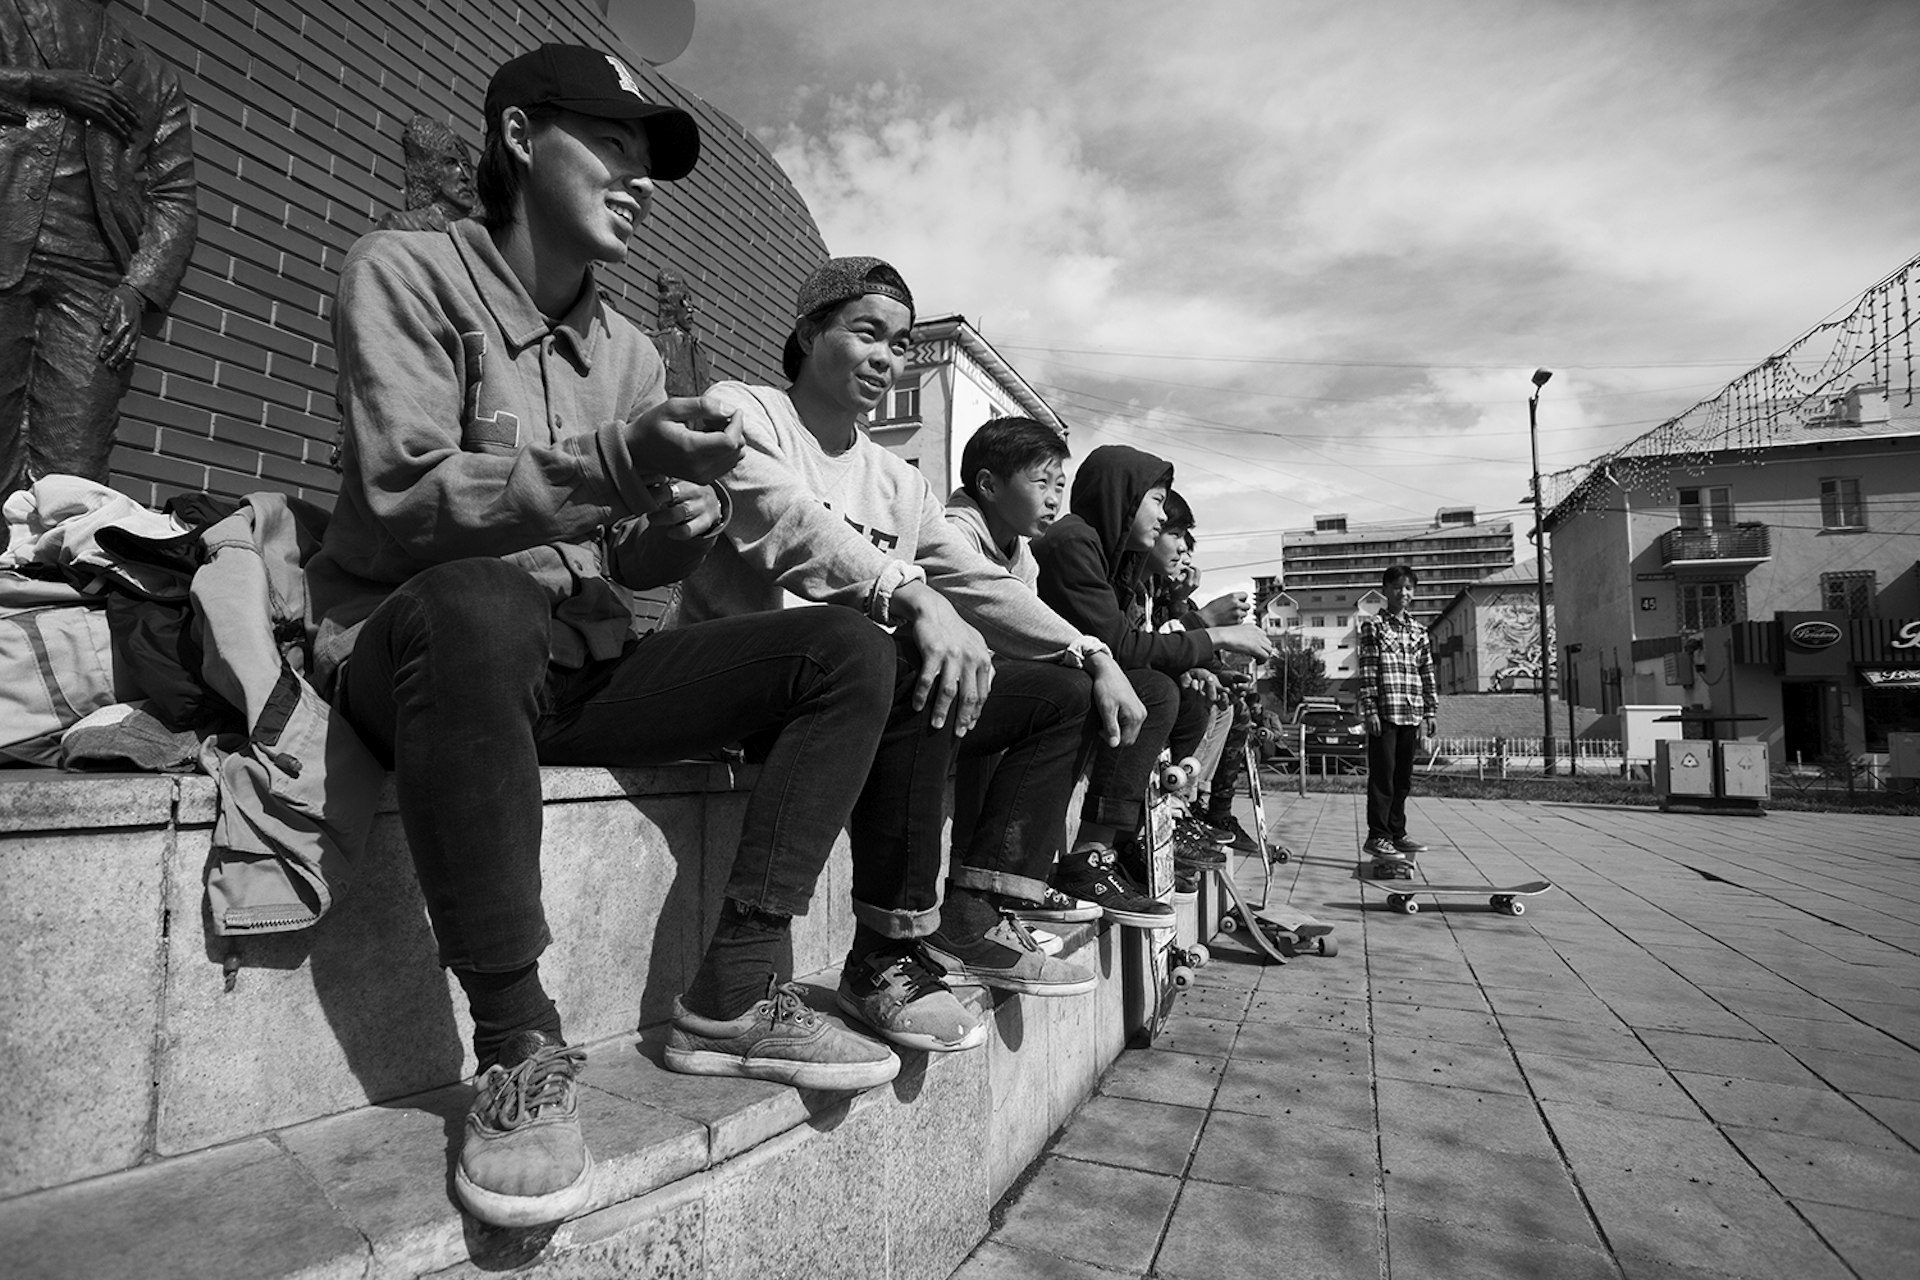 Mongolia’s skate scene is blowing up: here are the videos chronicling it